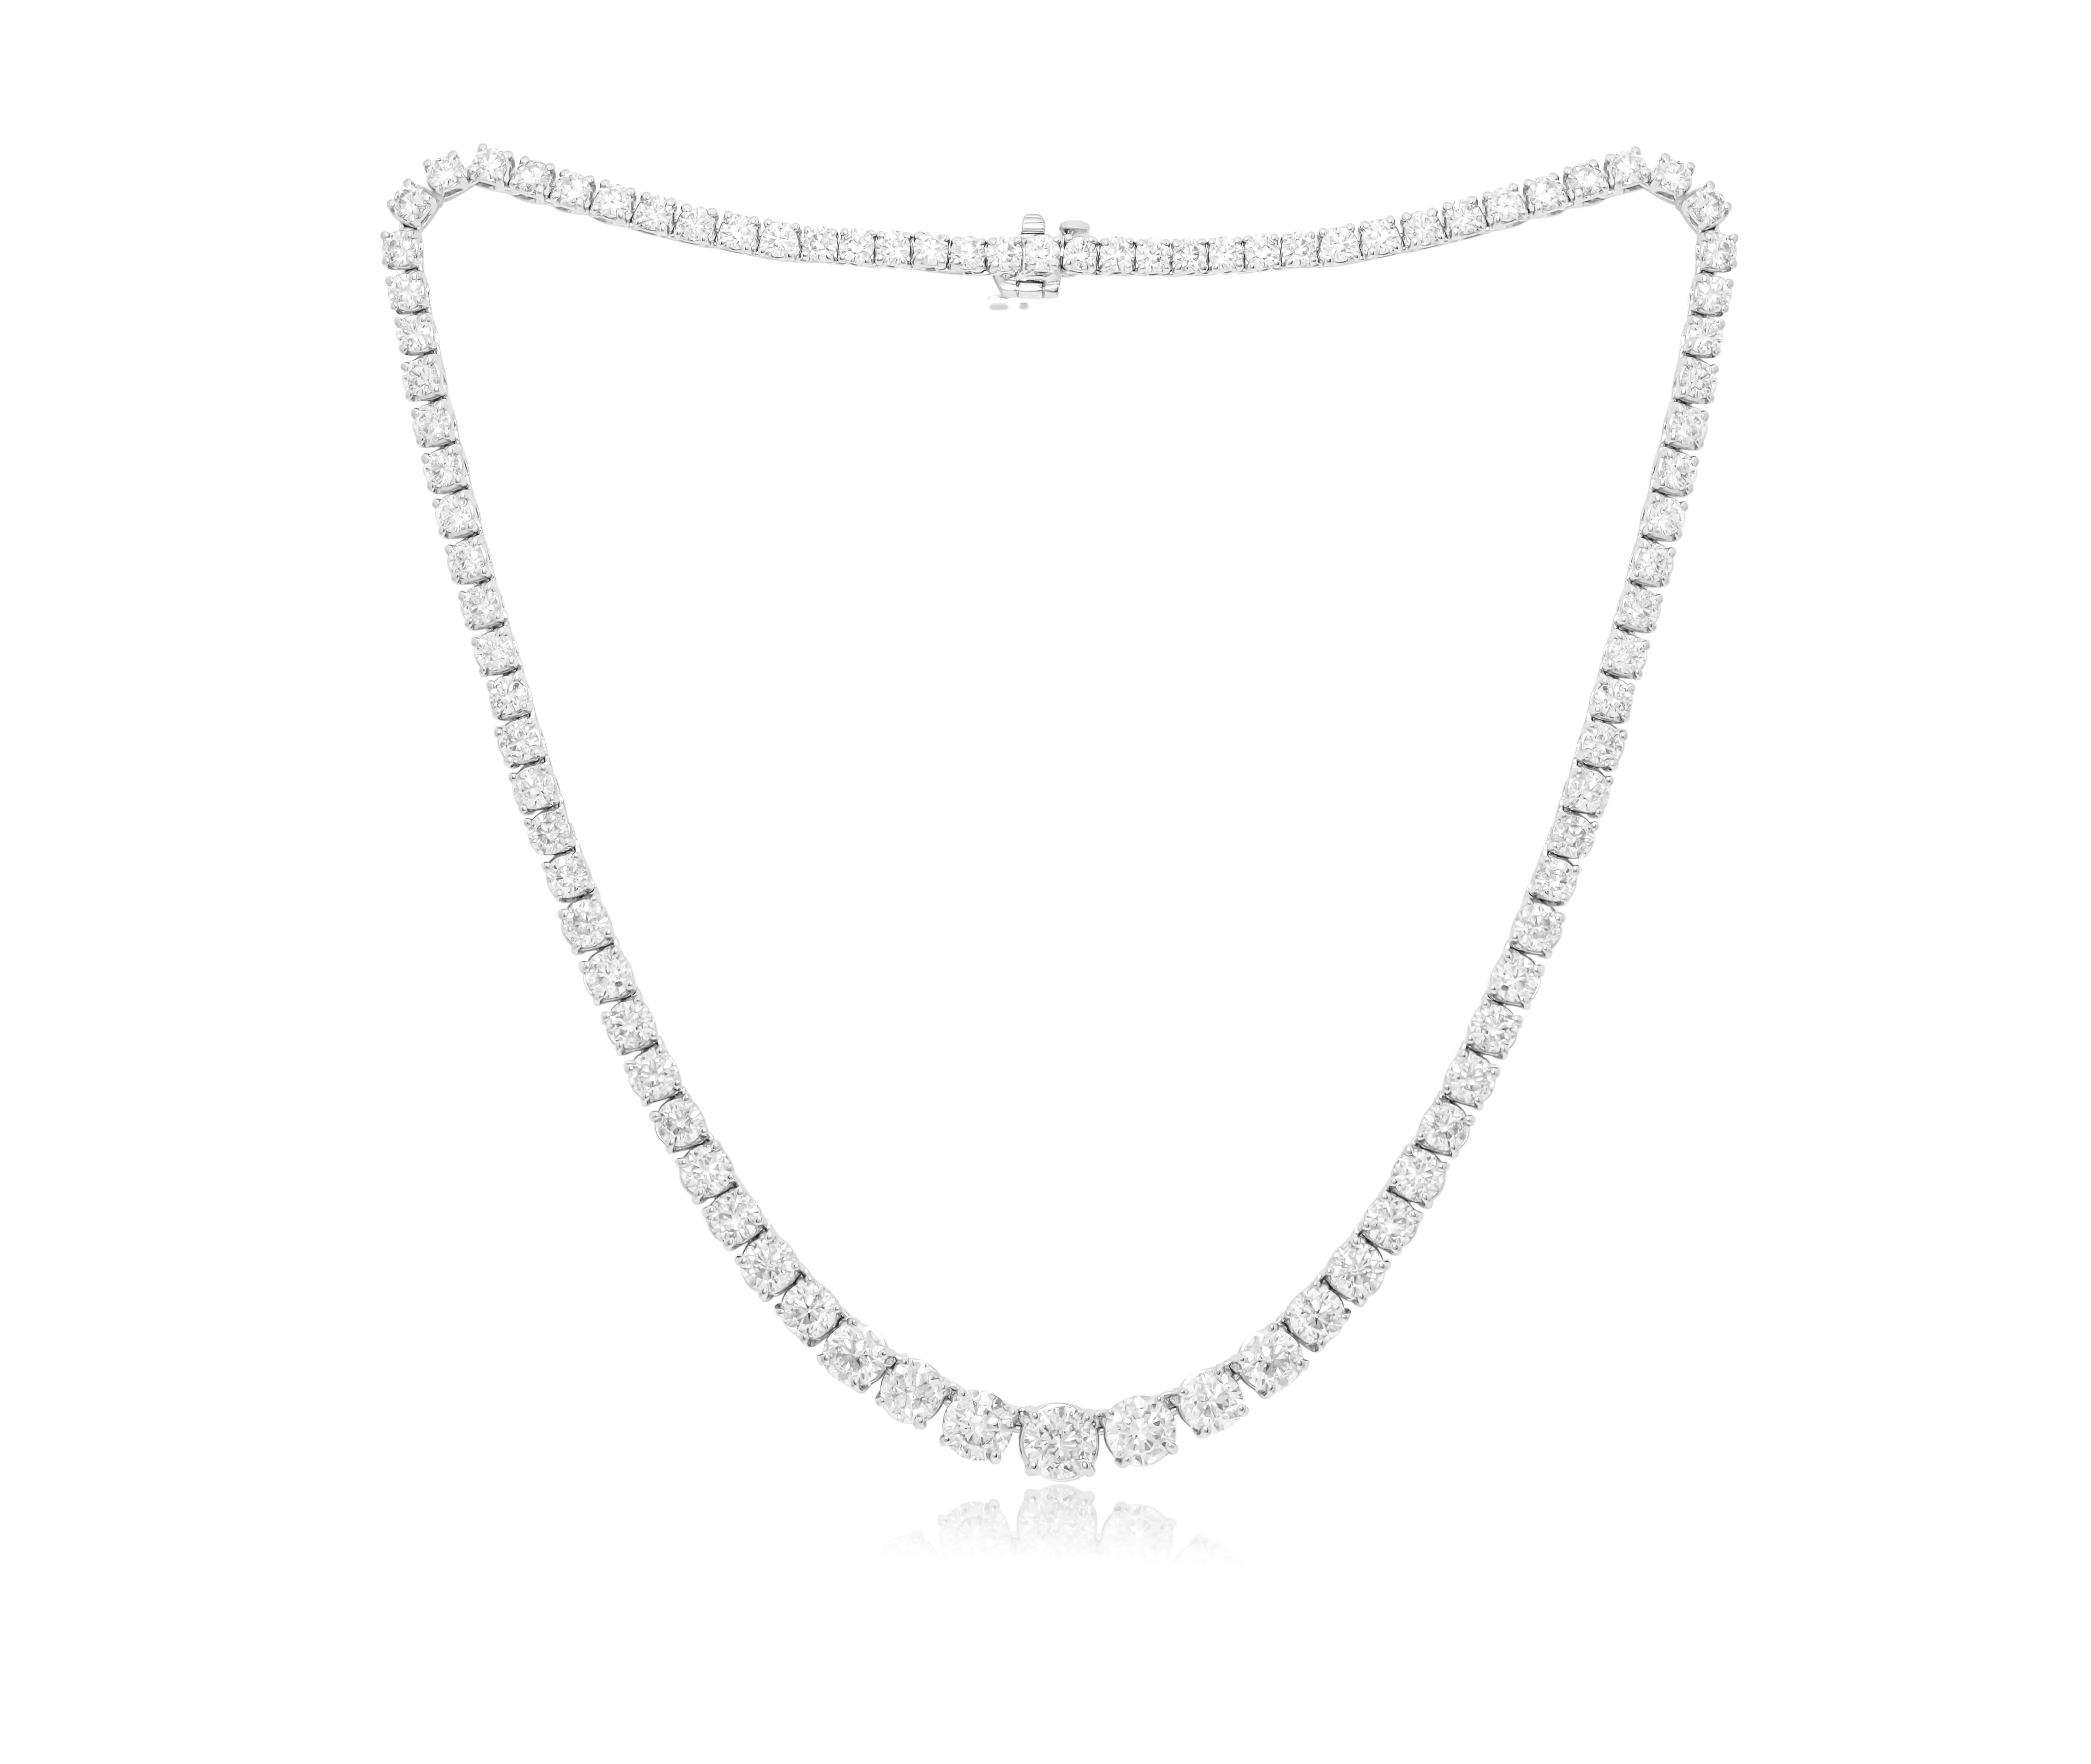 Taille ronde Diana M. 26,00 cts Or blanc 18 carats Graduated Riviera  Collier  en vente